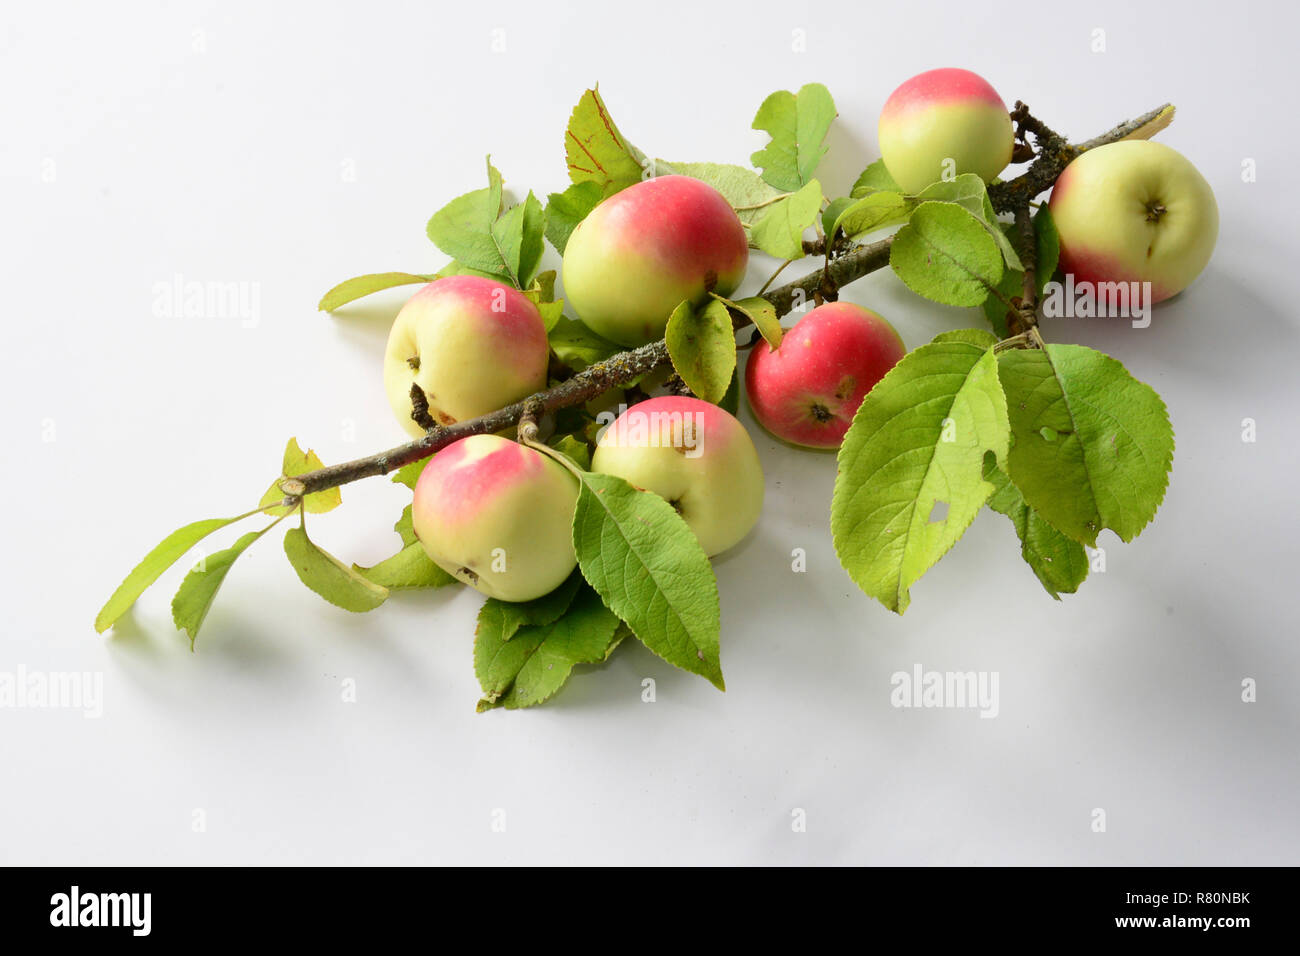 Common Crab Apple, Wild Crab Apple (Malus sylvestris). Twig with leaves and ripe apples. Studio picture against a white background Stock Photo